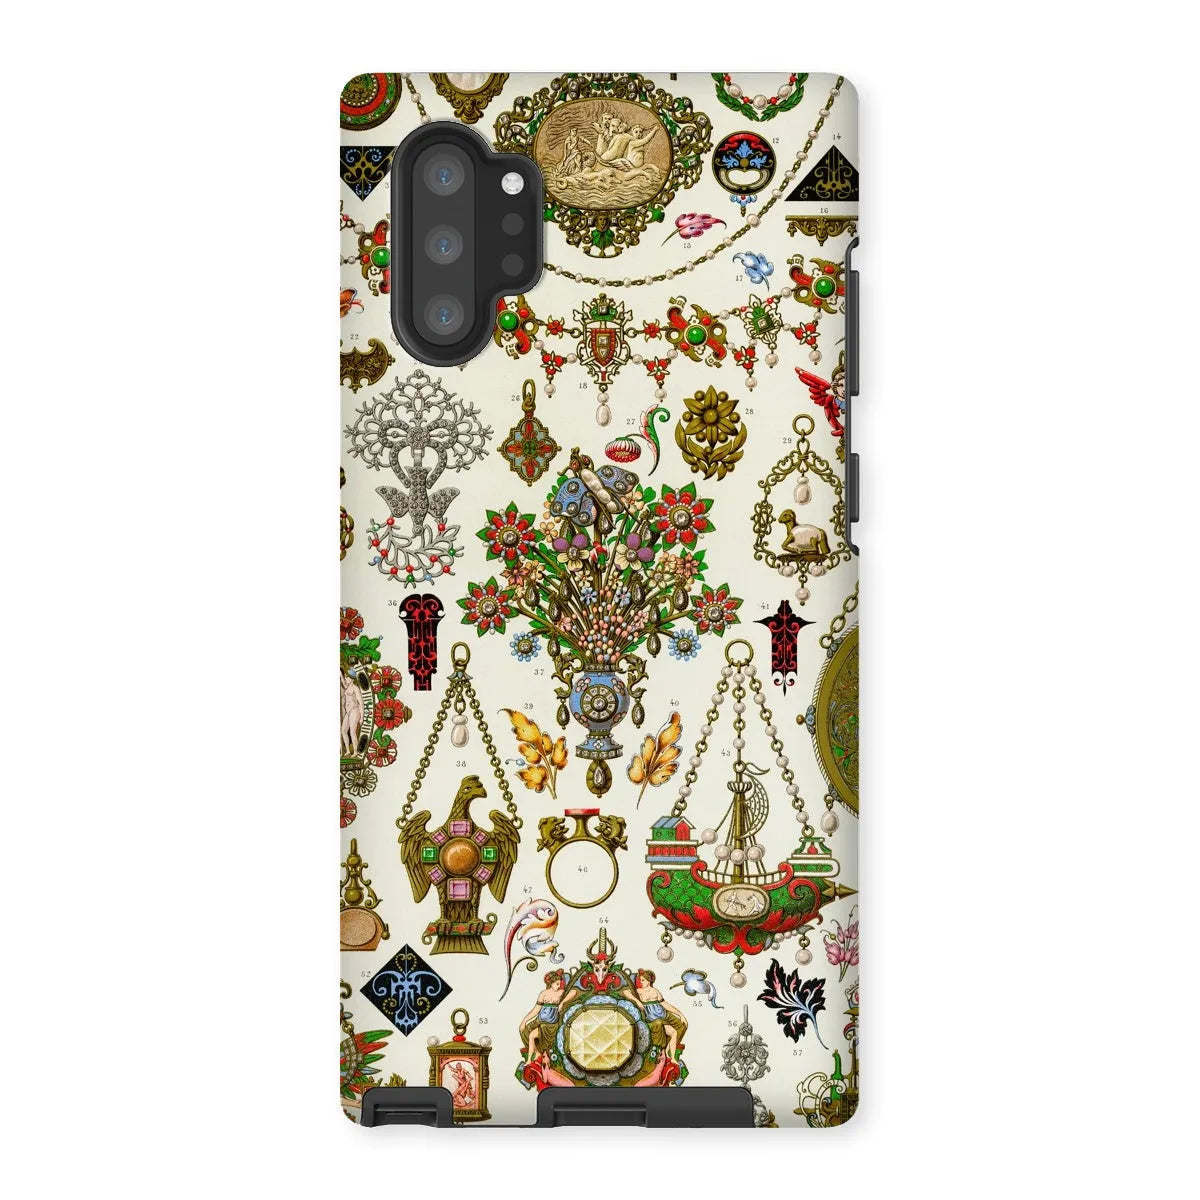 French Jewelry By Auguste Racinet Tough Phone Case - Samsung Galaxy Note 10p / Matte - Mobile Phone Cases - Aesthetic